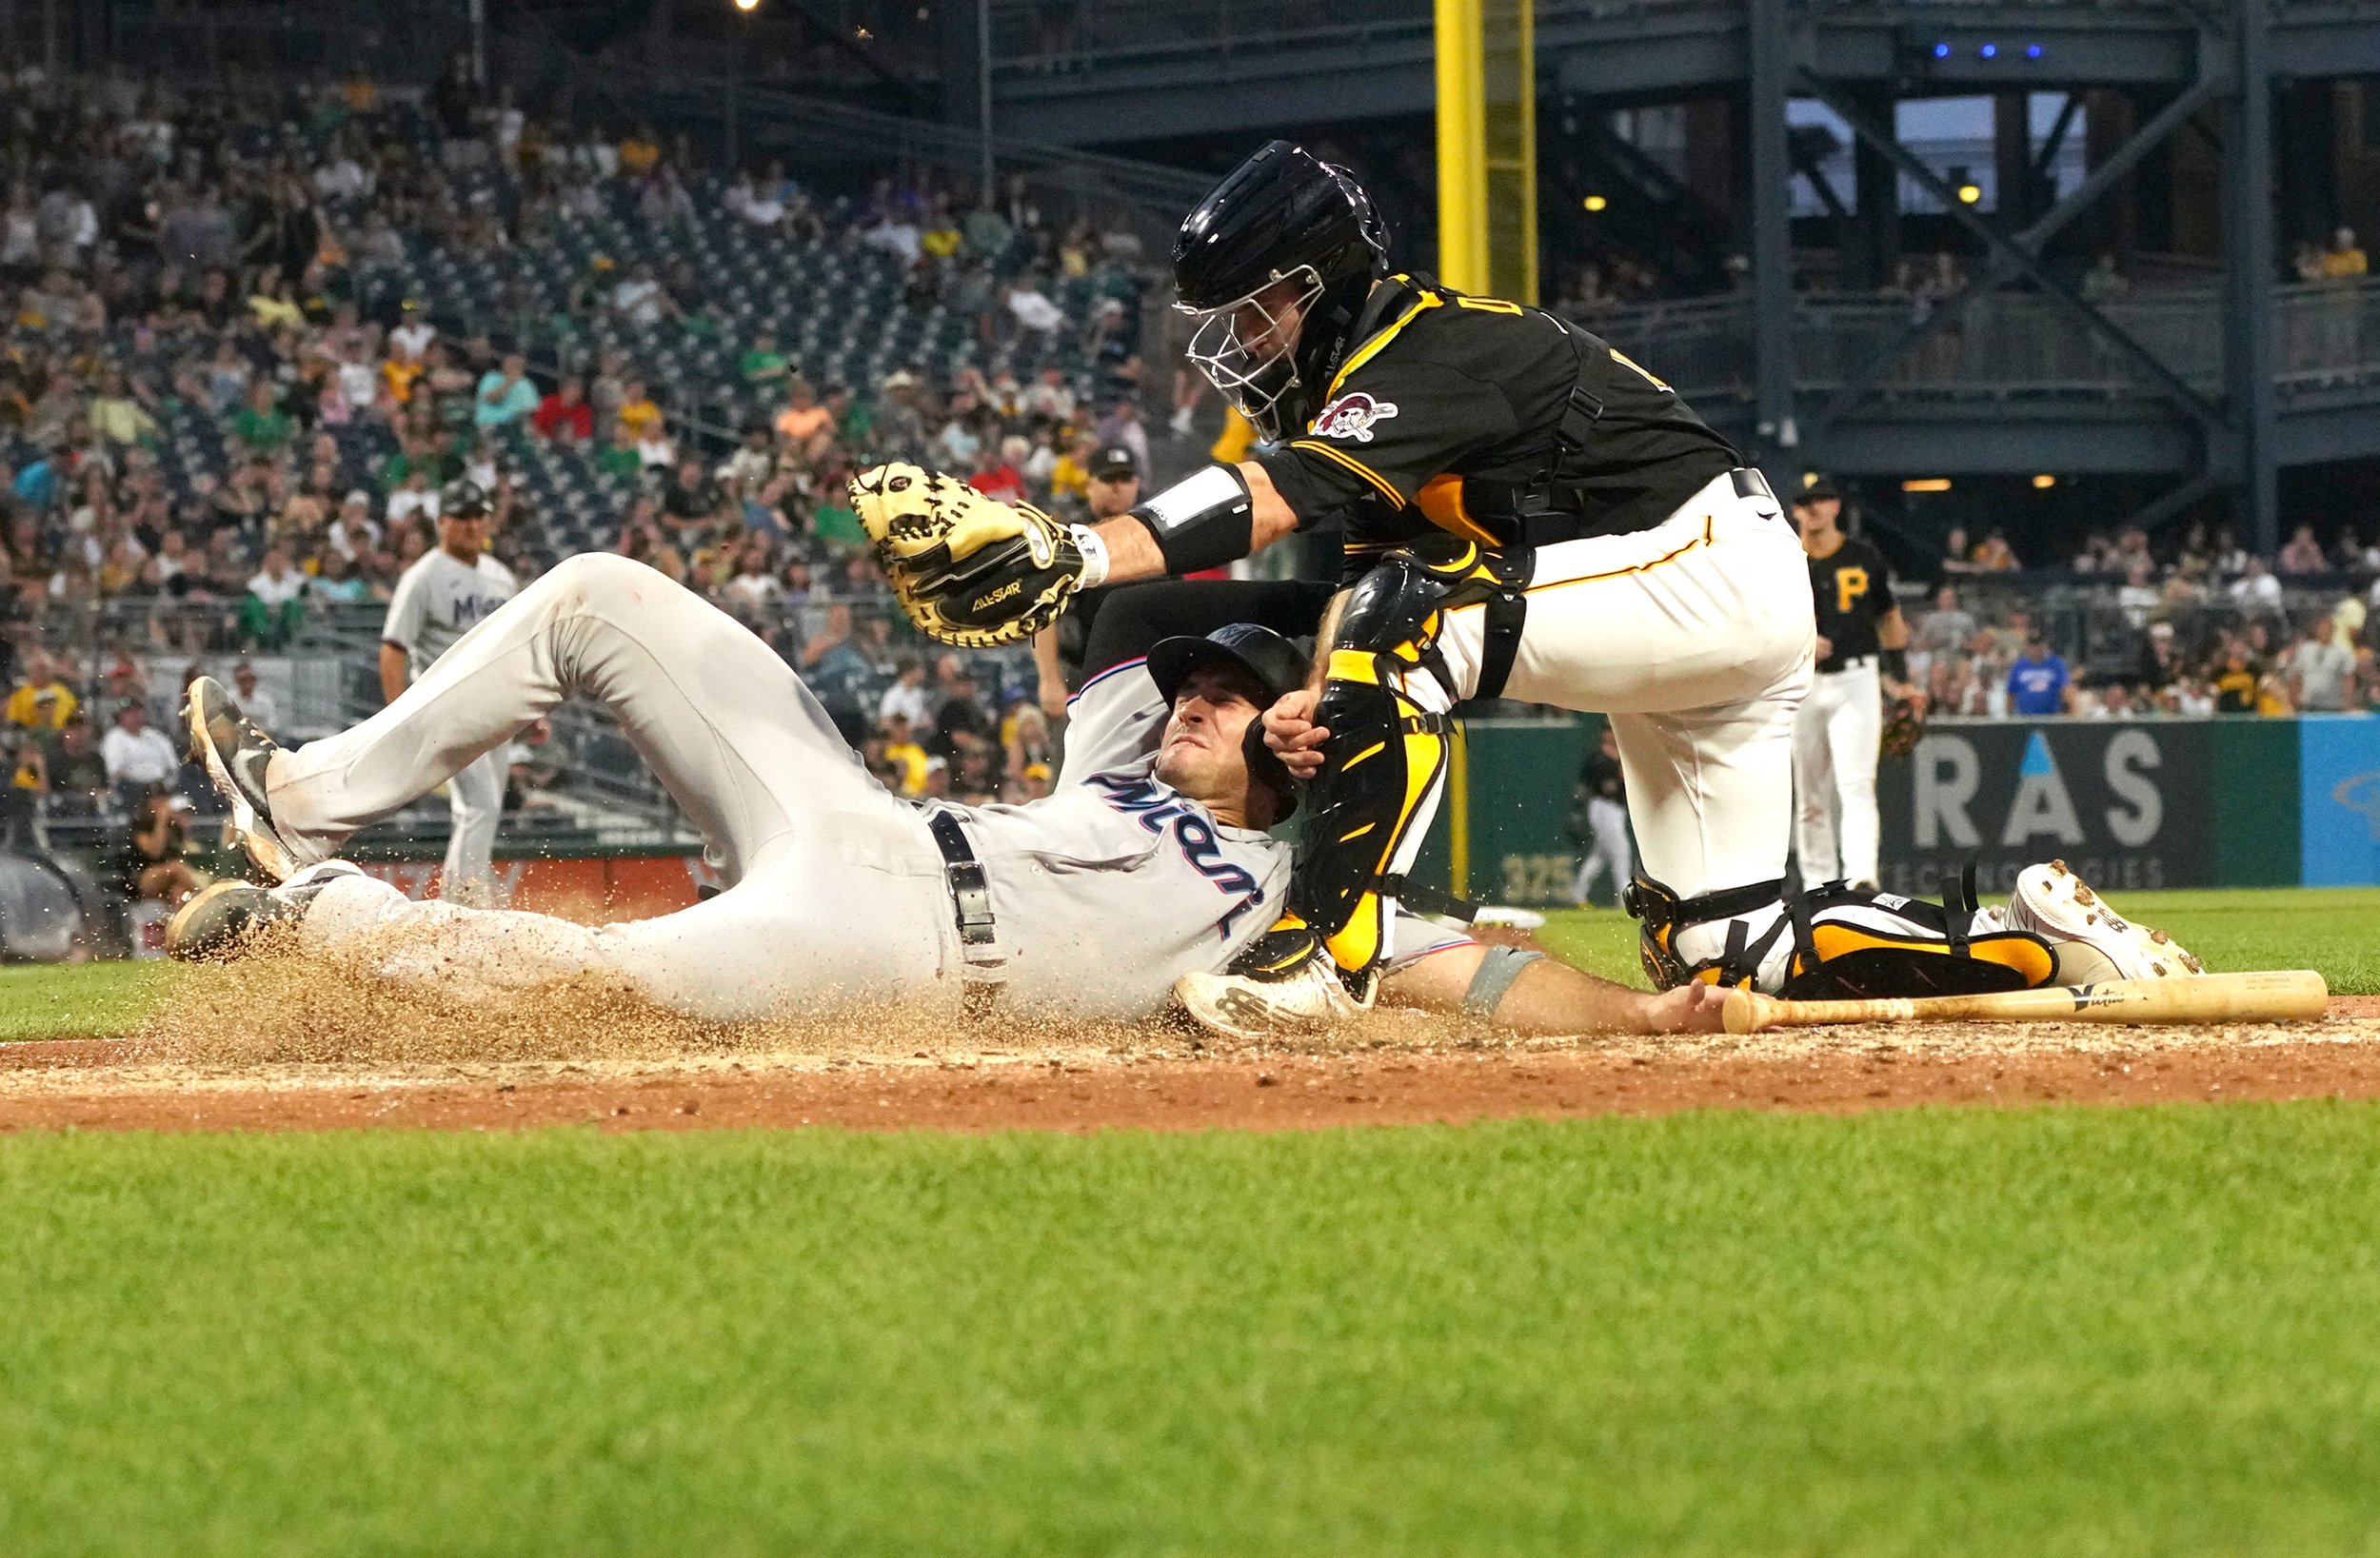  Pirates’ Jason Delay tags Marlins’ Nick Fortes at home on Friday, July 22, 2022, at PNC Park. Fortes was initially called out, but after review, the call was overturned due to Delay blocking the plate. Fortes’ run advanced the Marlins’ lead 7-1 in t